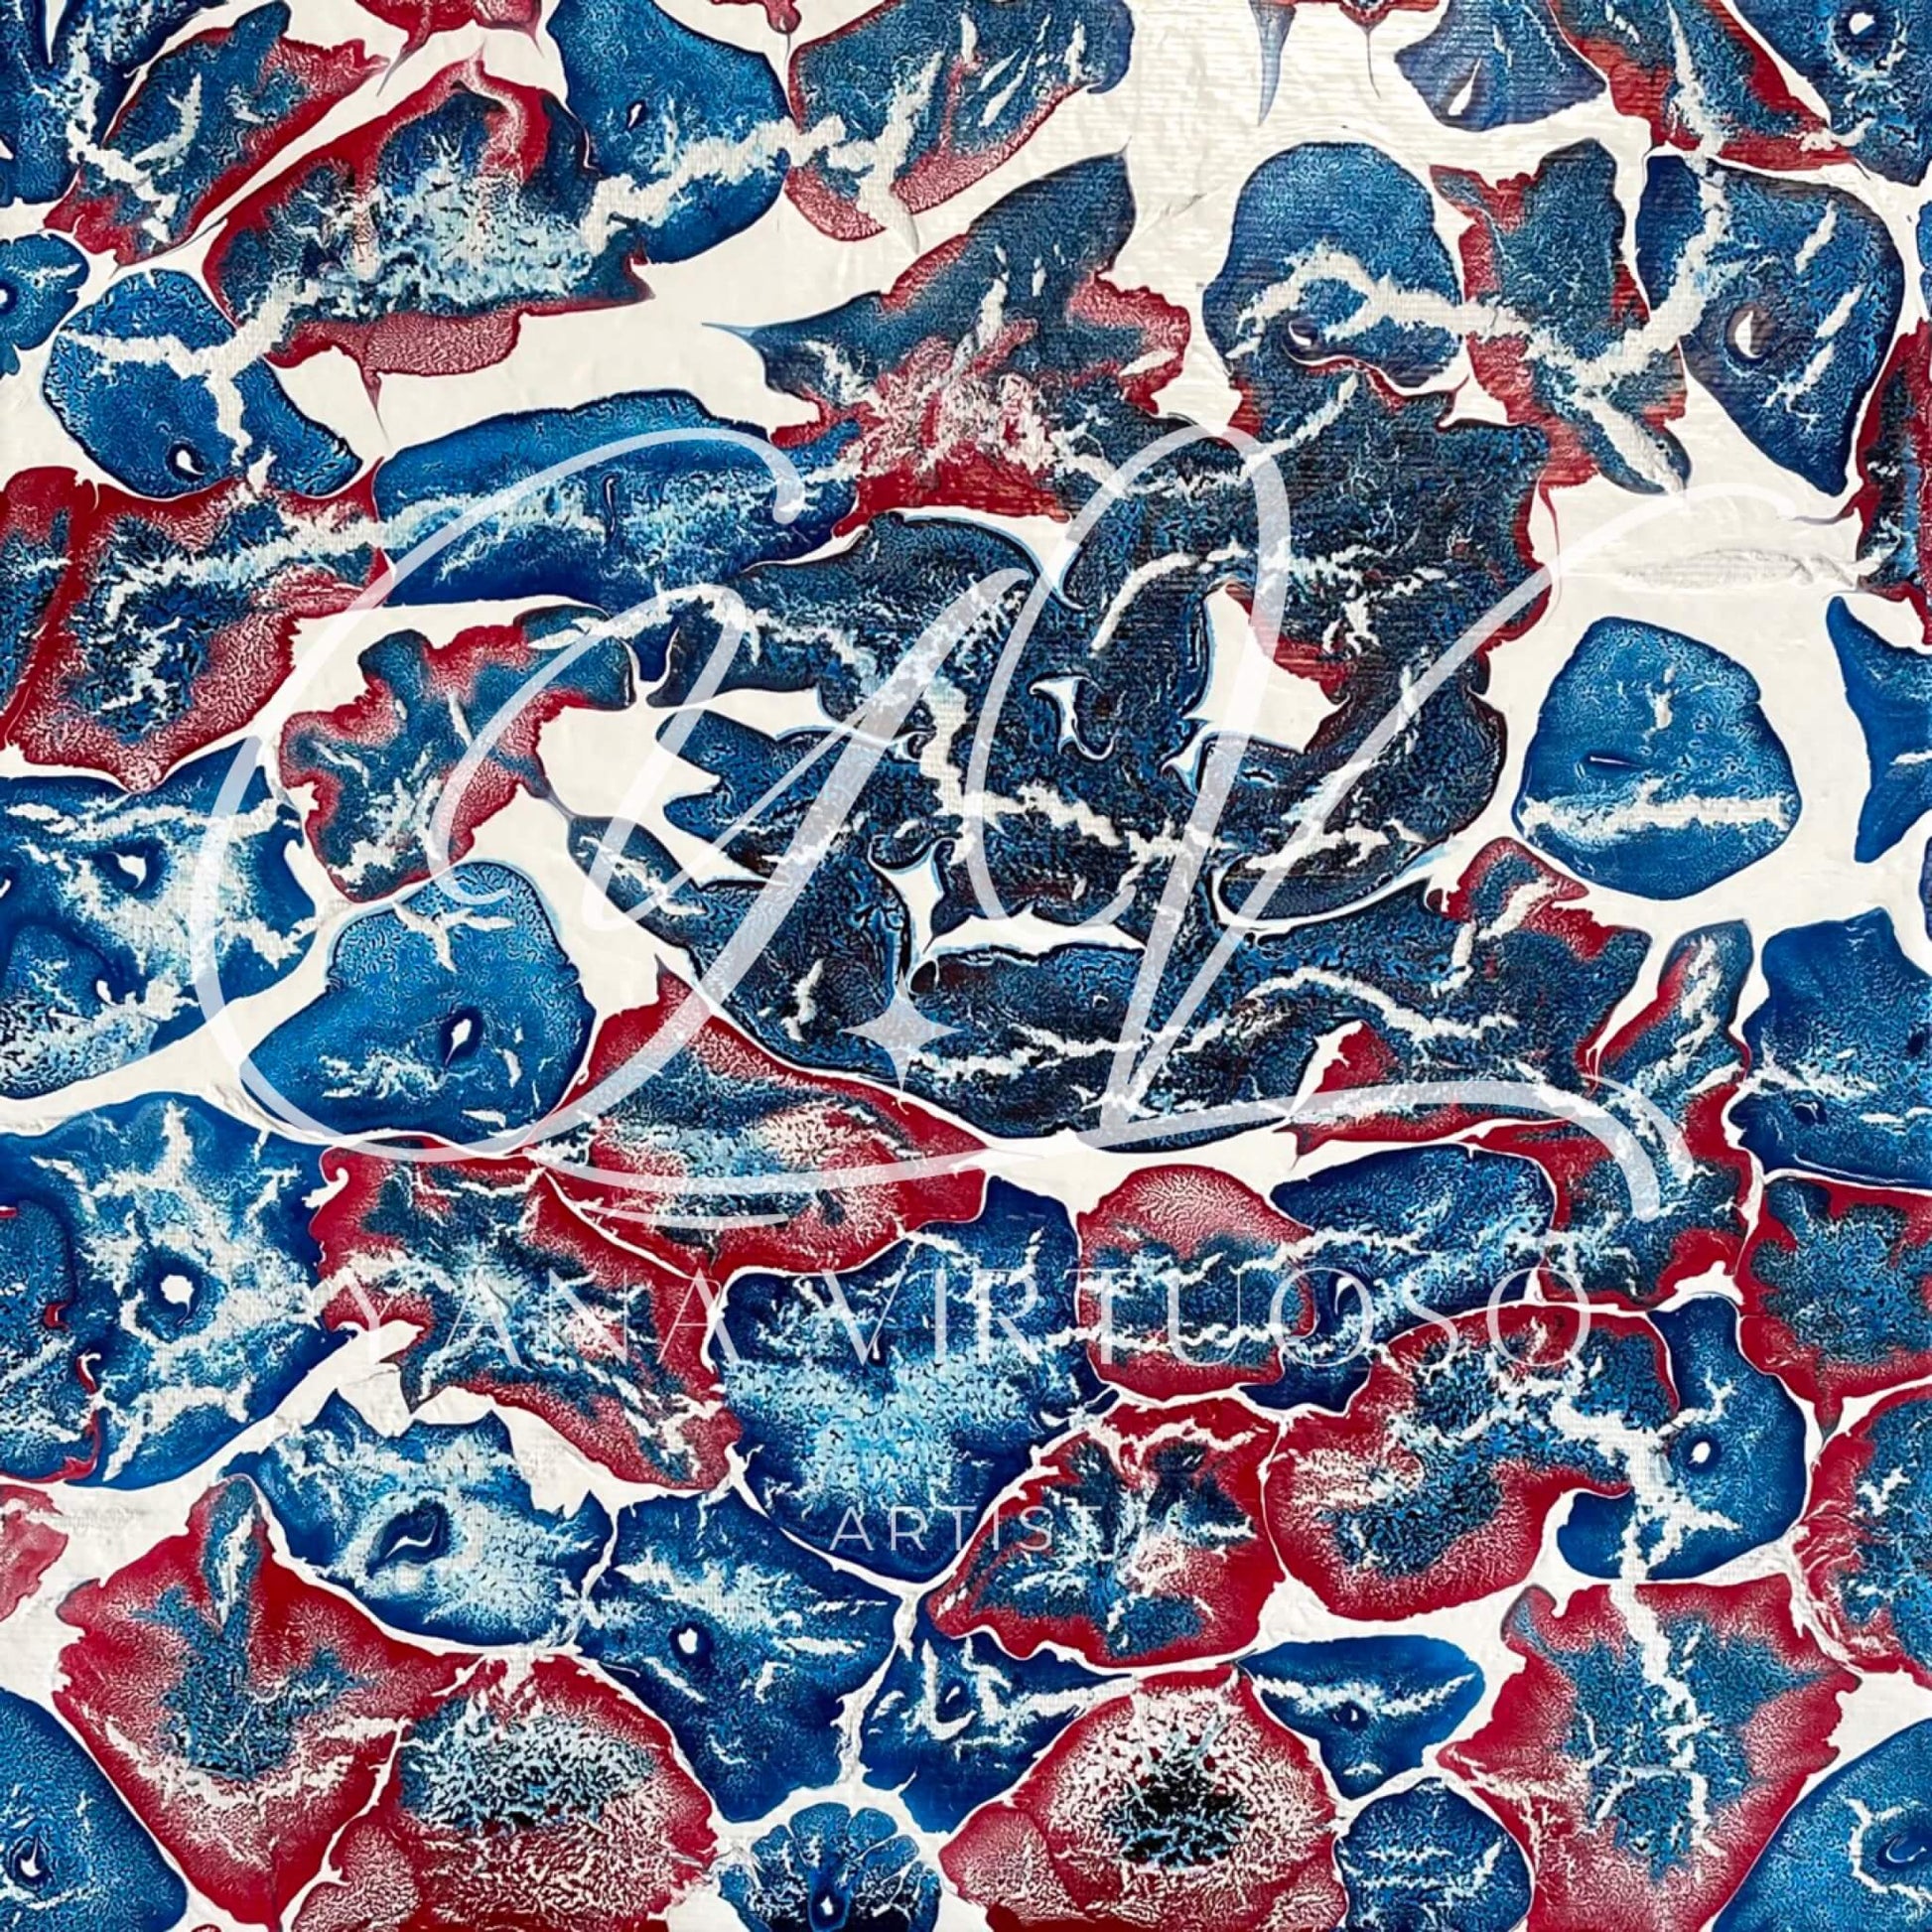 Close-up view of the "Marine Animals" painting highlighting the rich interplay of red and blue tones with white accents, illustrating the vibrant underwater life through fluid art technique.